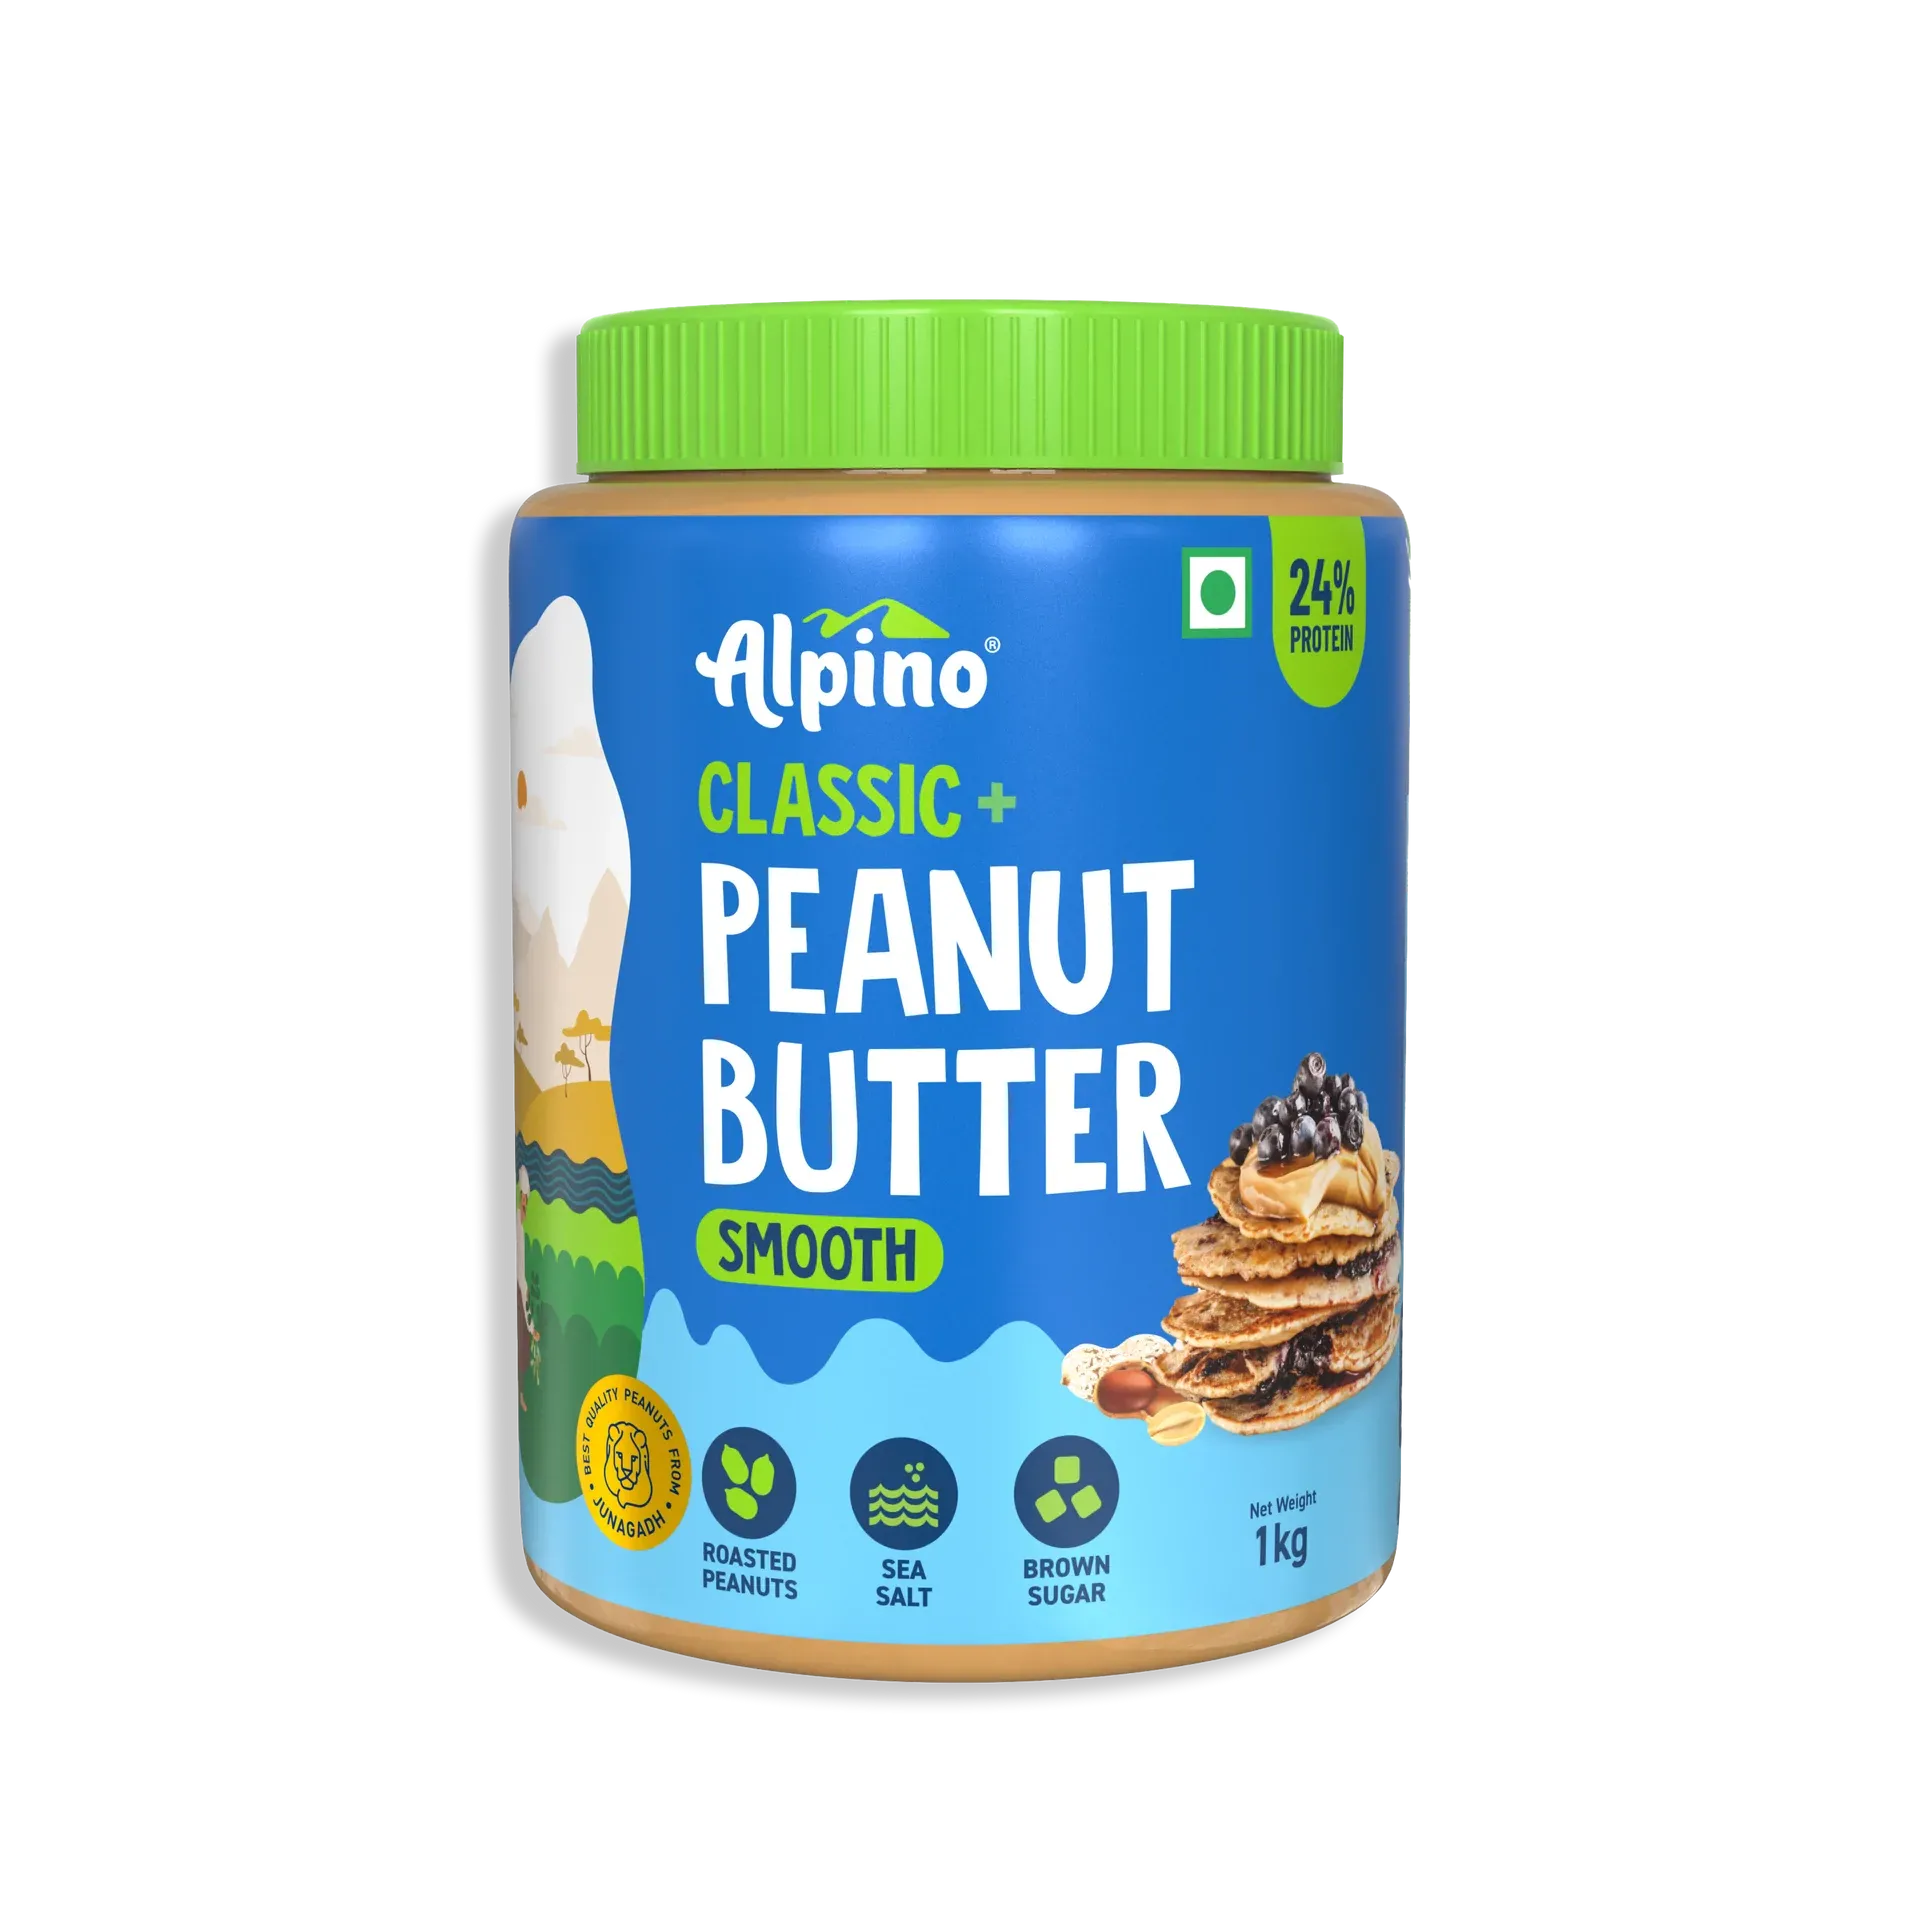 Alpino Classic Peanut Butter Smooth Image